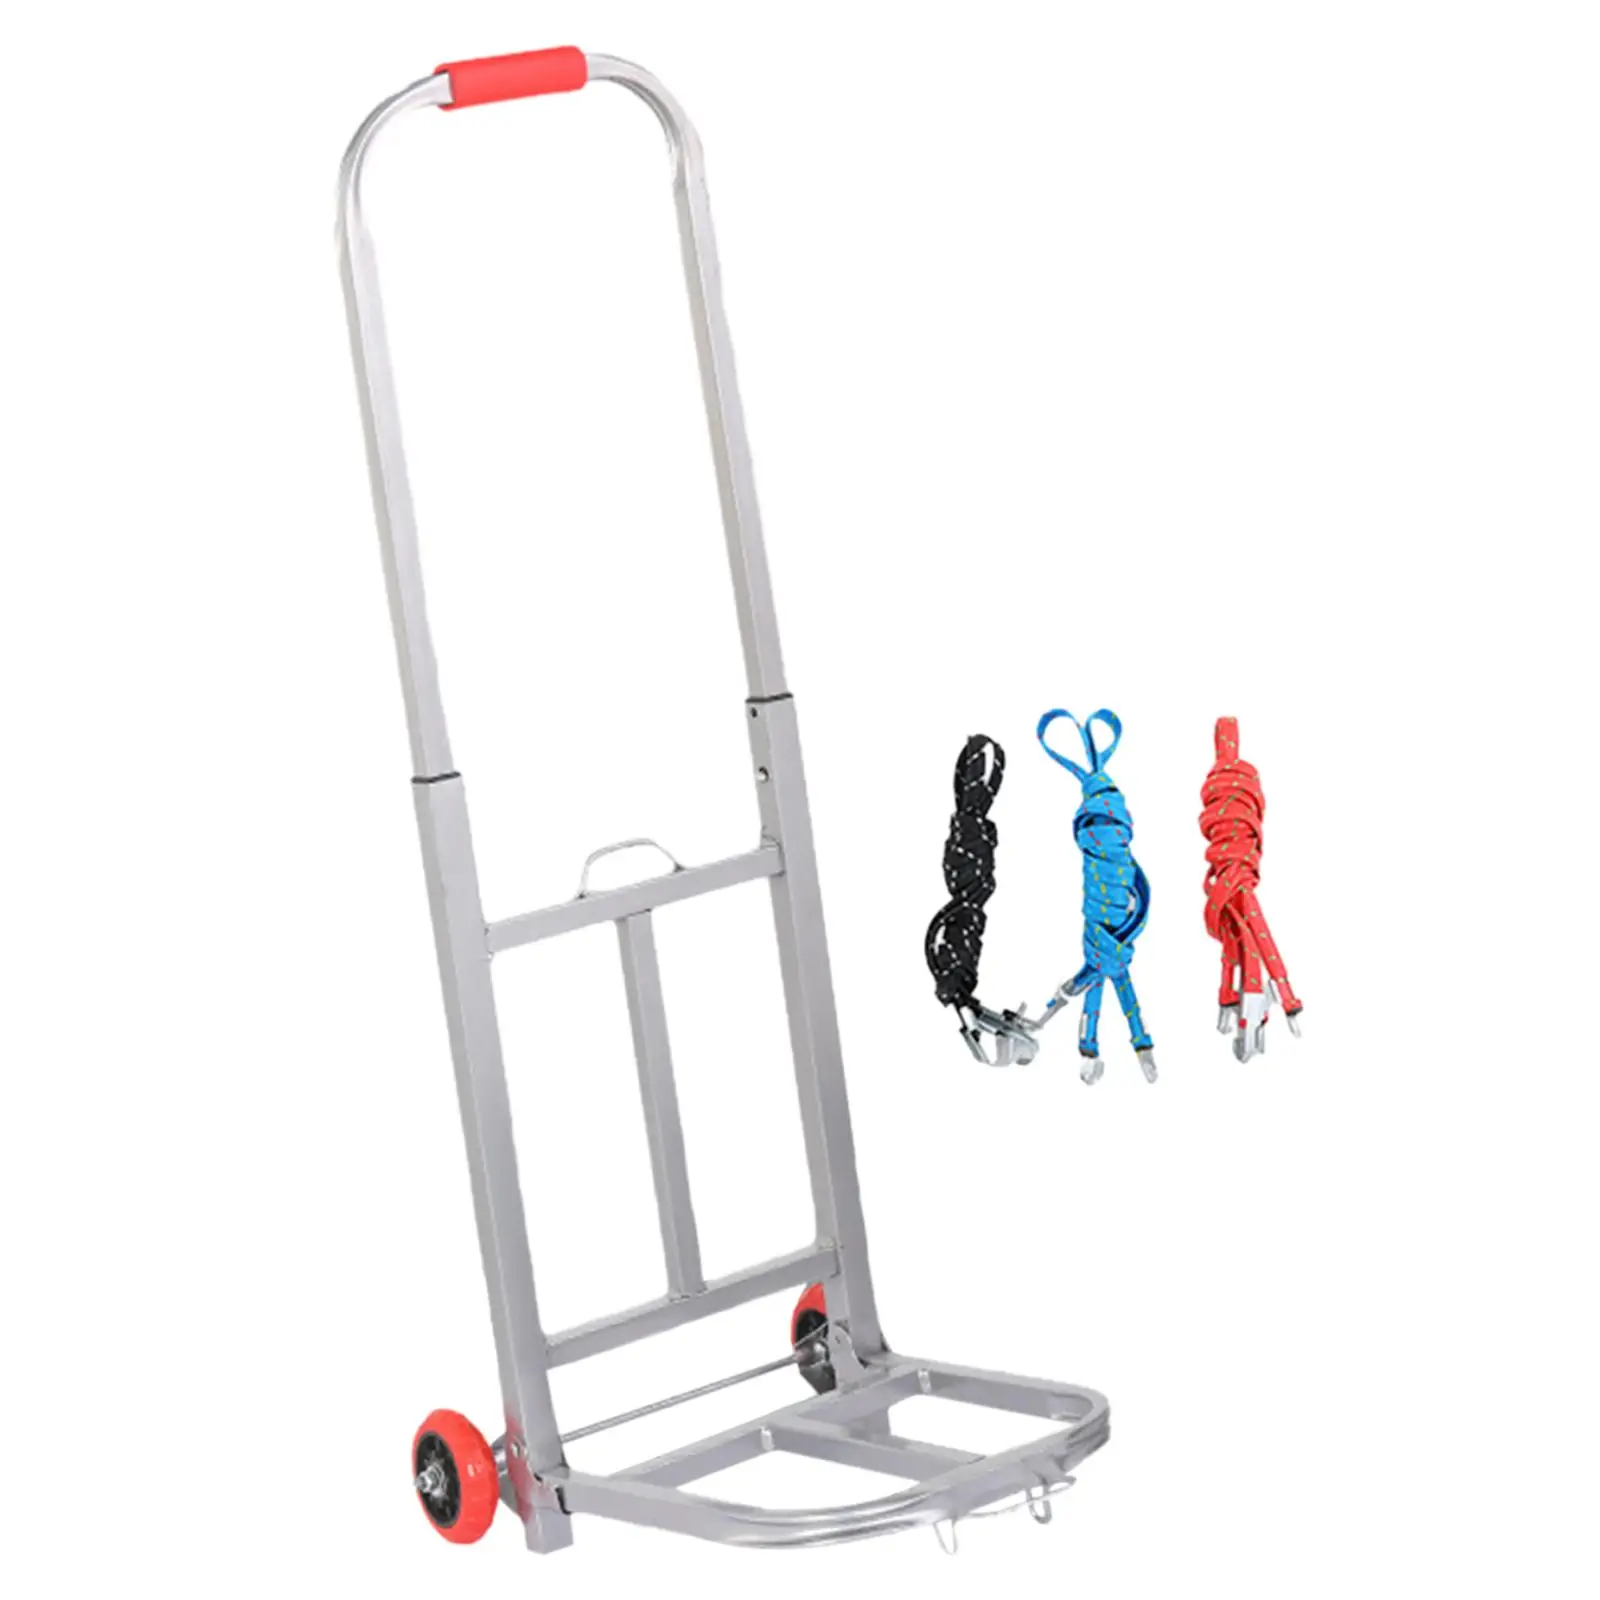 Foldable Folding Hand Truck Luggage Handcart Metal Frame for Personal Travel